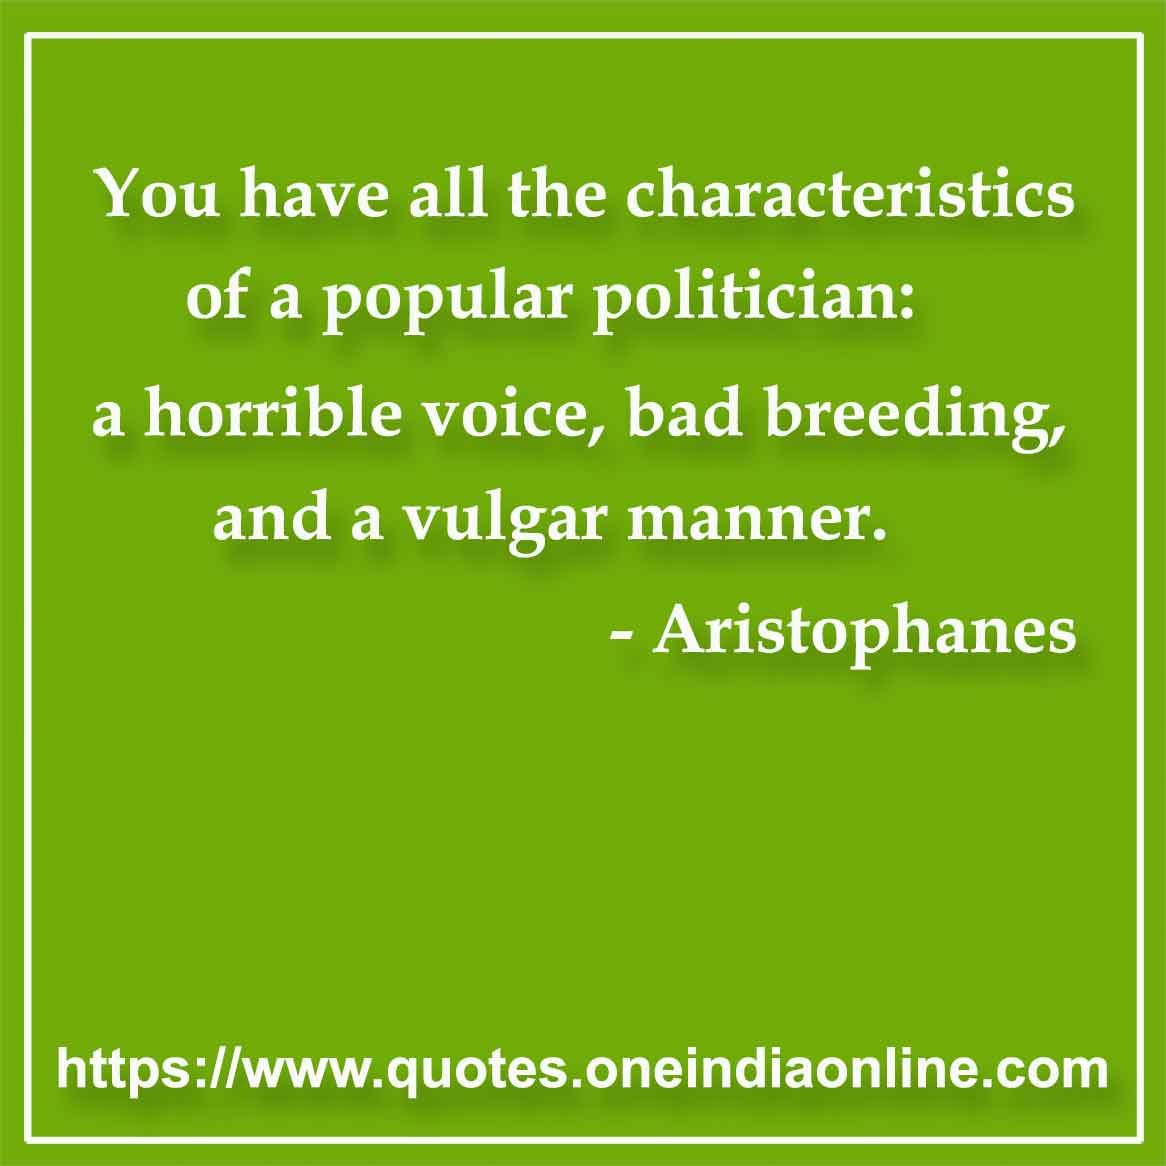 You have all the characteristics of a popular politician: a horrible voice, bad breeding, and a vulgar manner.

- Politician Quote by Aristophanes 